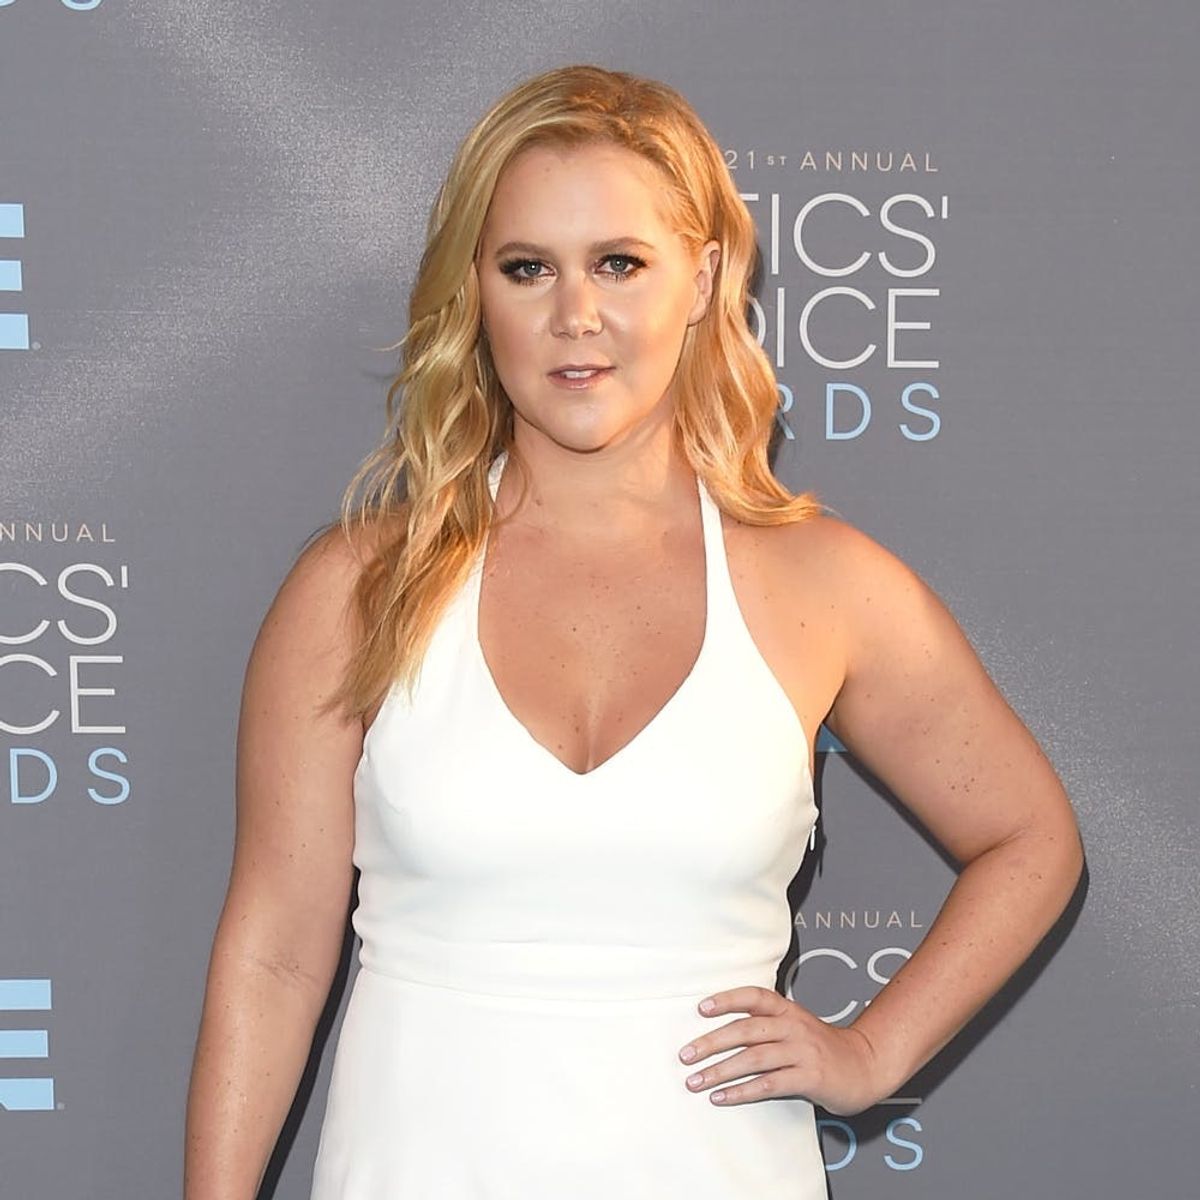 Amy Schumer Responds to Ashley Graham’s Cosmo Comments in the BEST Way